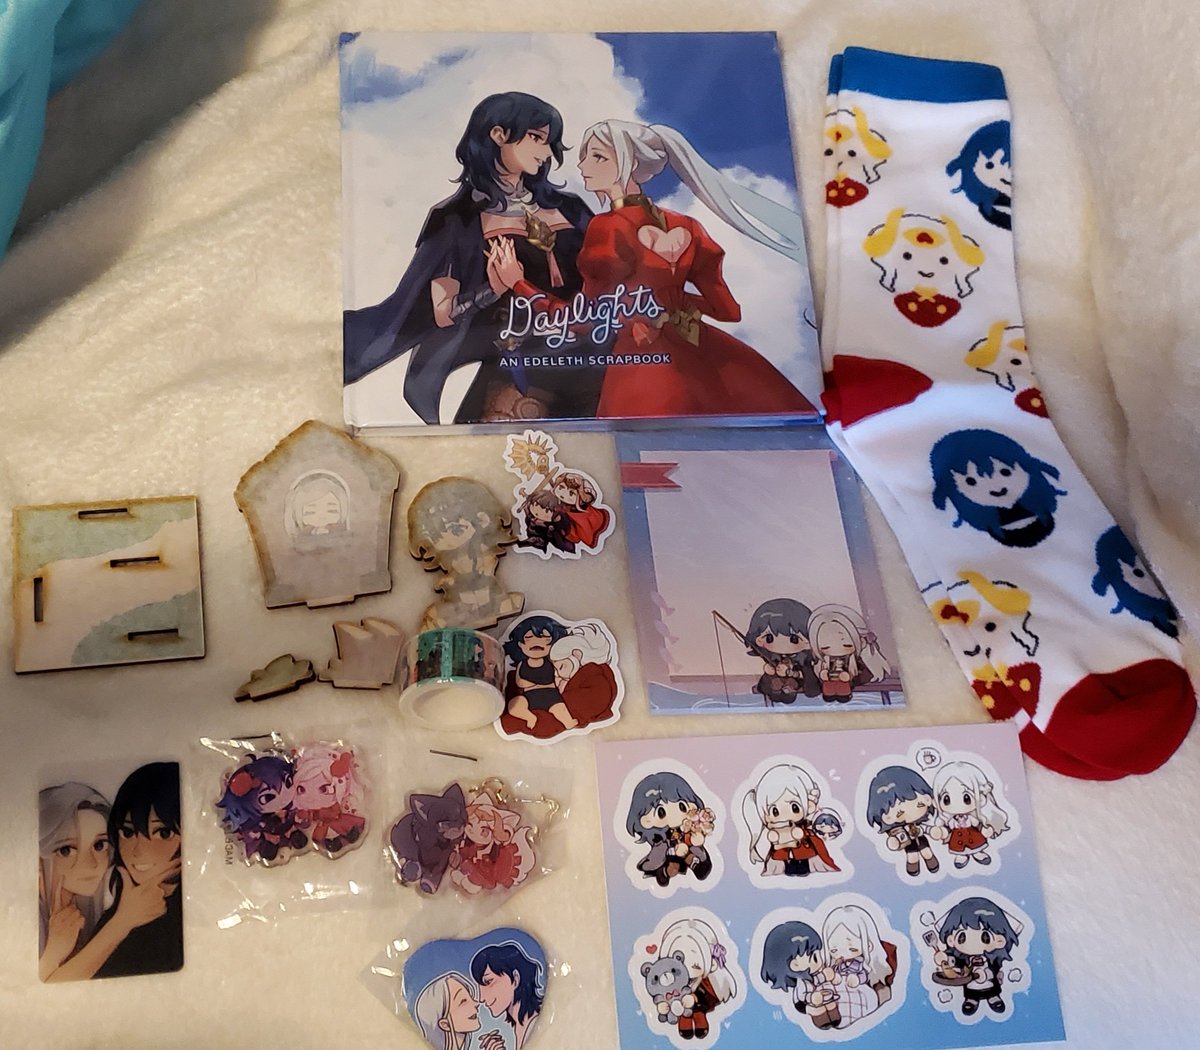 Thank you to @Frosttbutt and all of the people who put together this little bundle of love. I read it and cried a little bit, but it was good tears